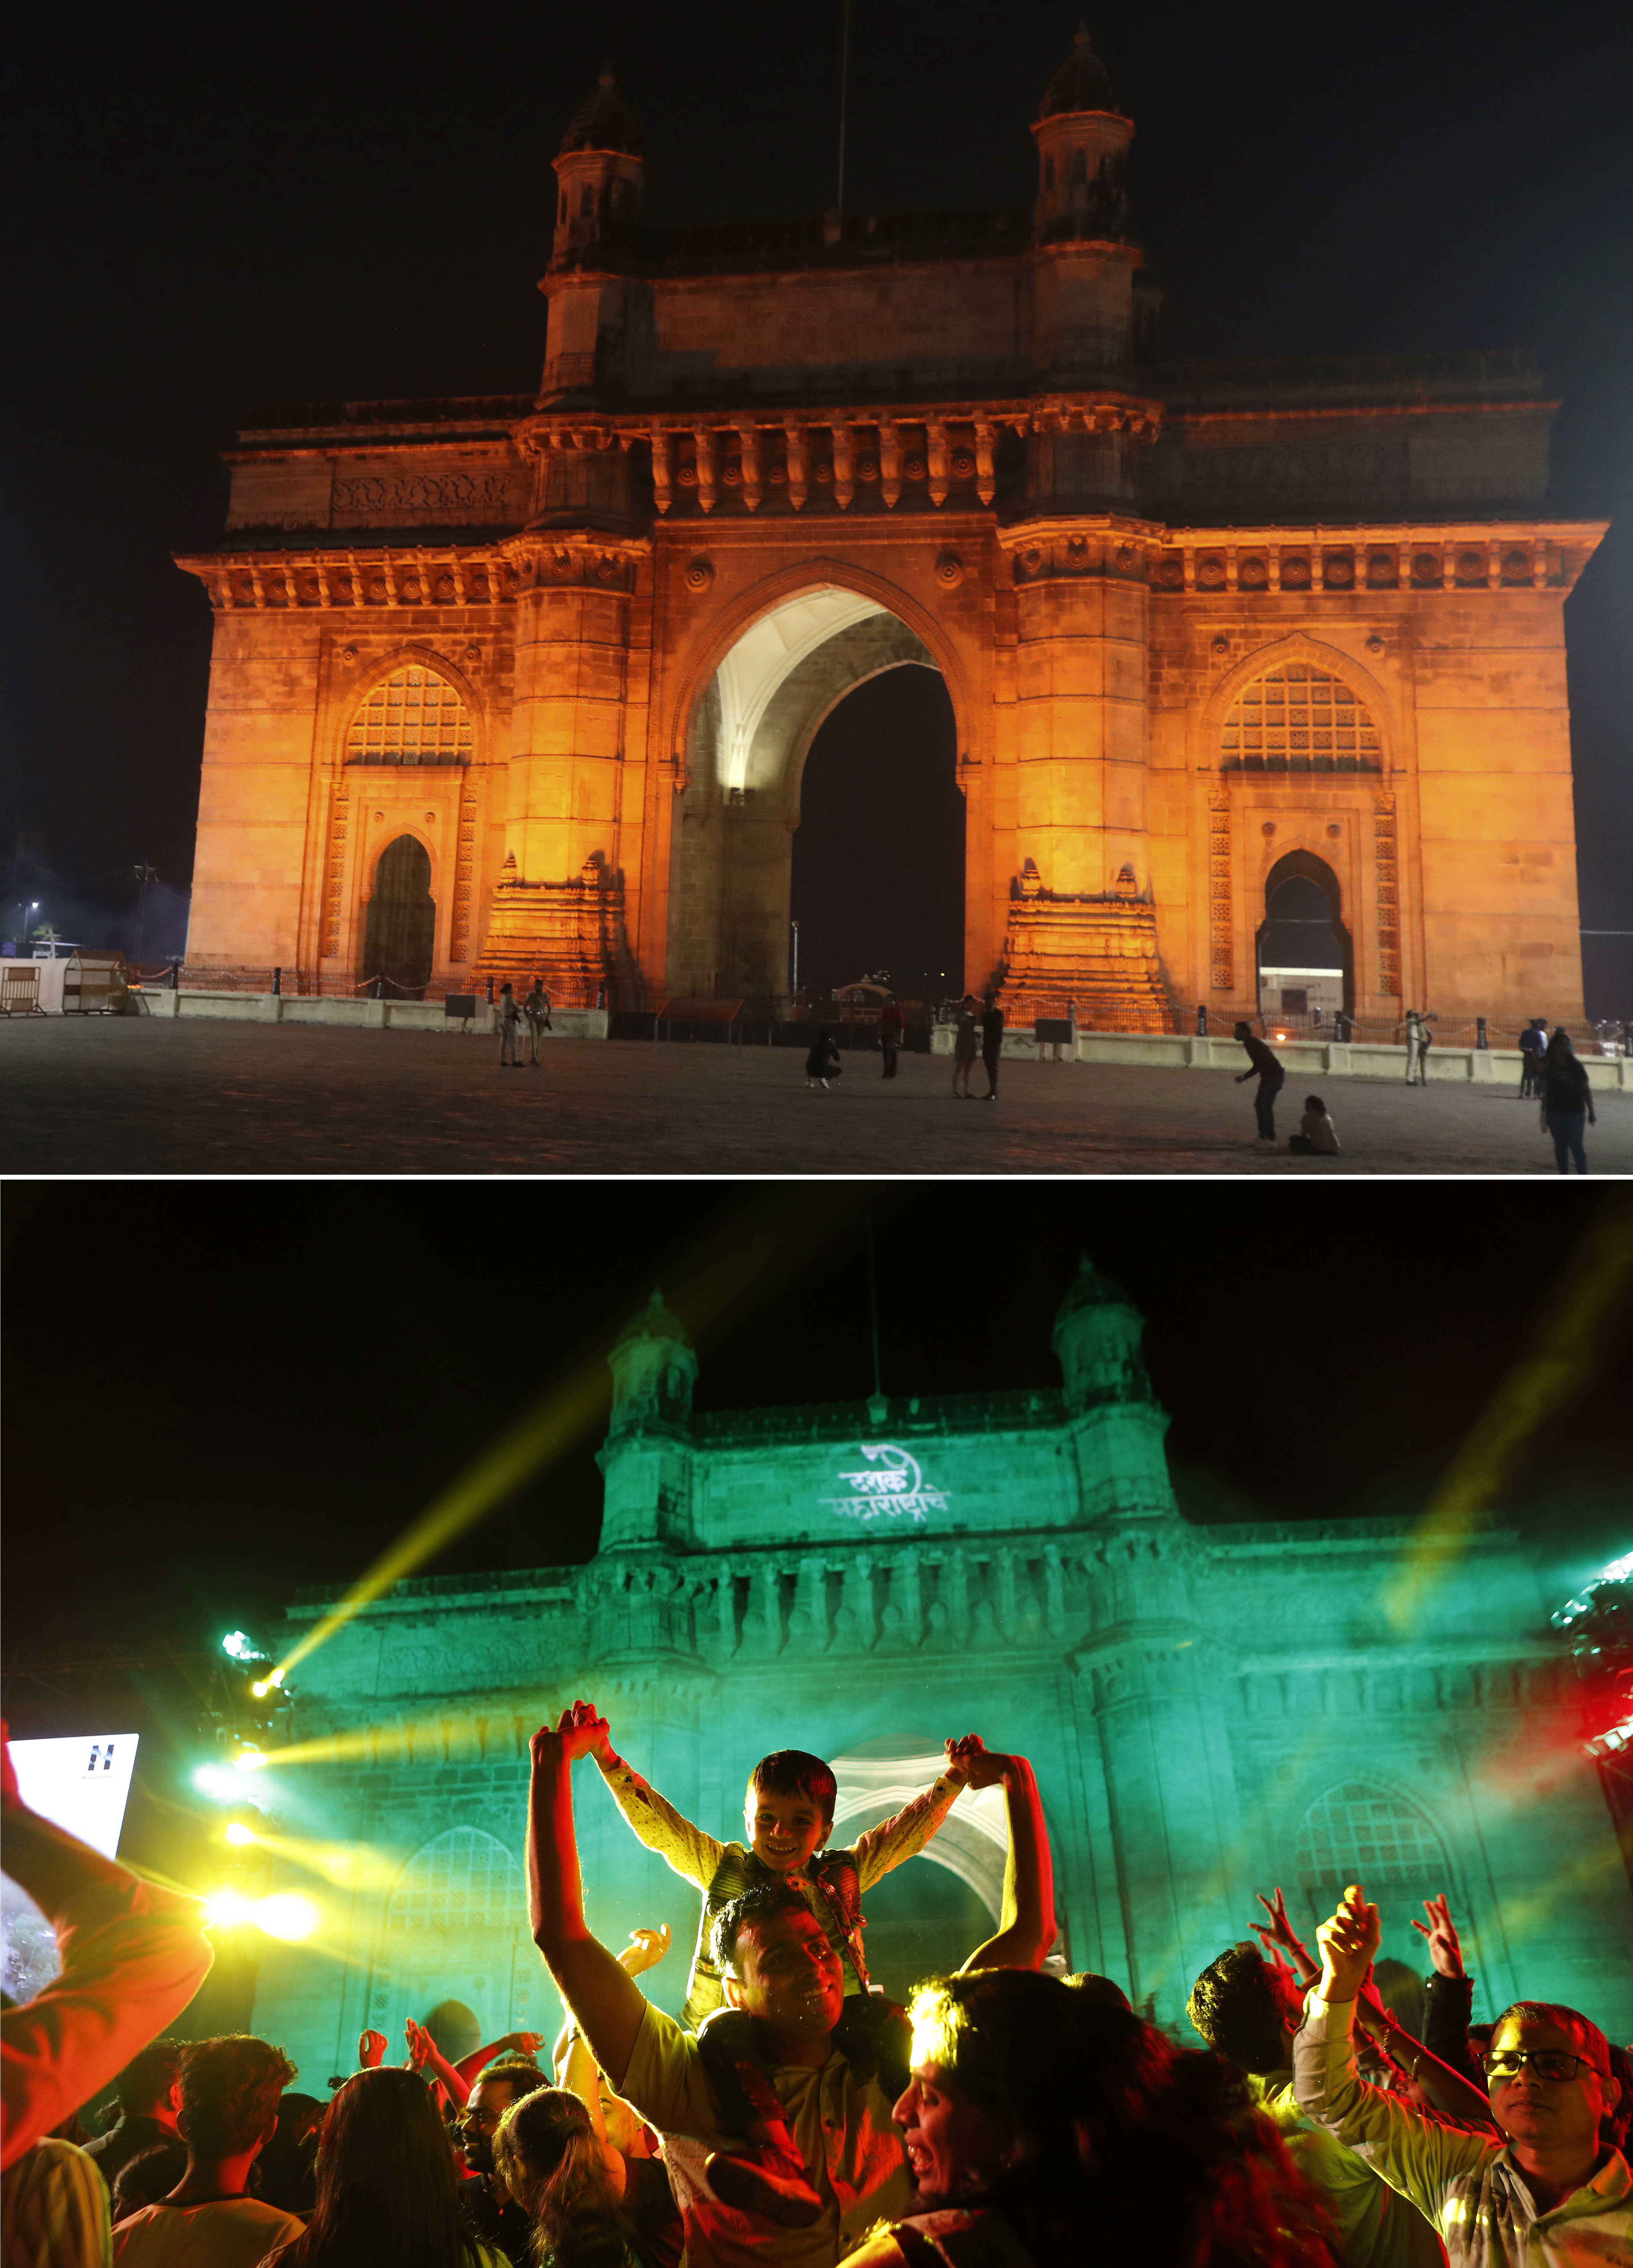 The Gateway of India in Mumbai on December 31 2020, top, and on December 31 2019